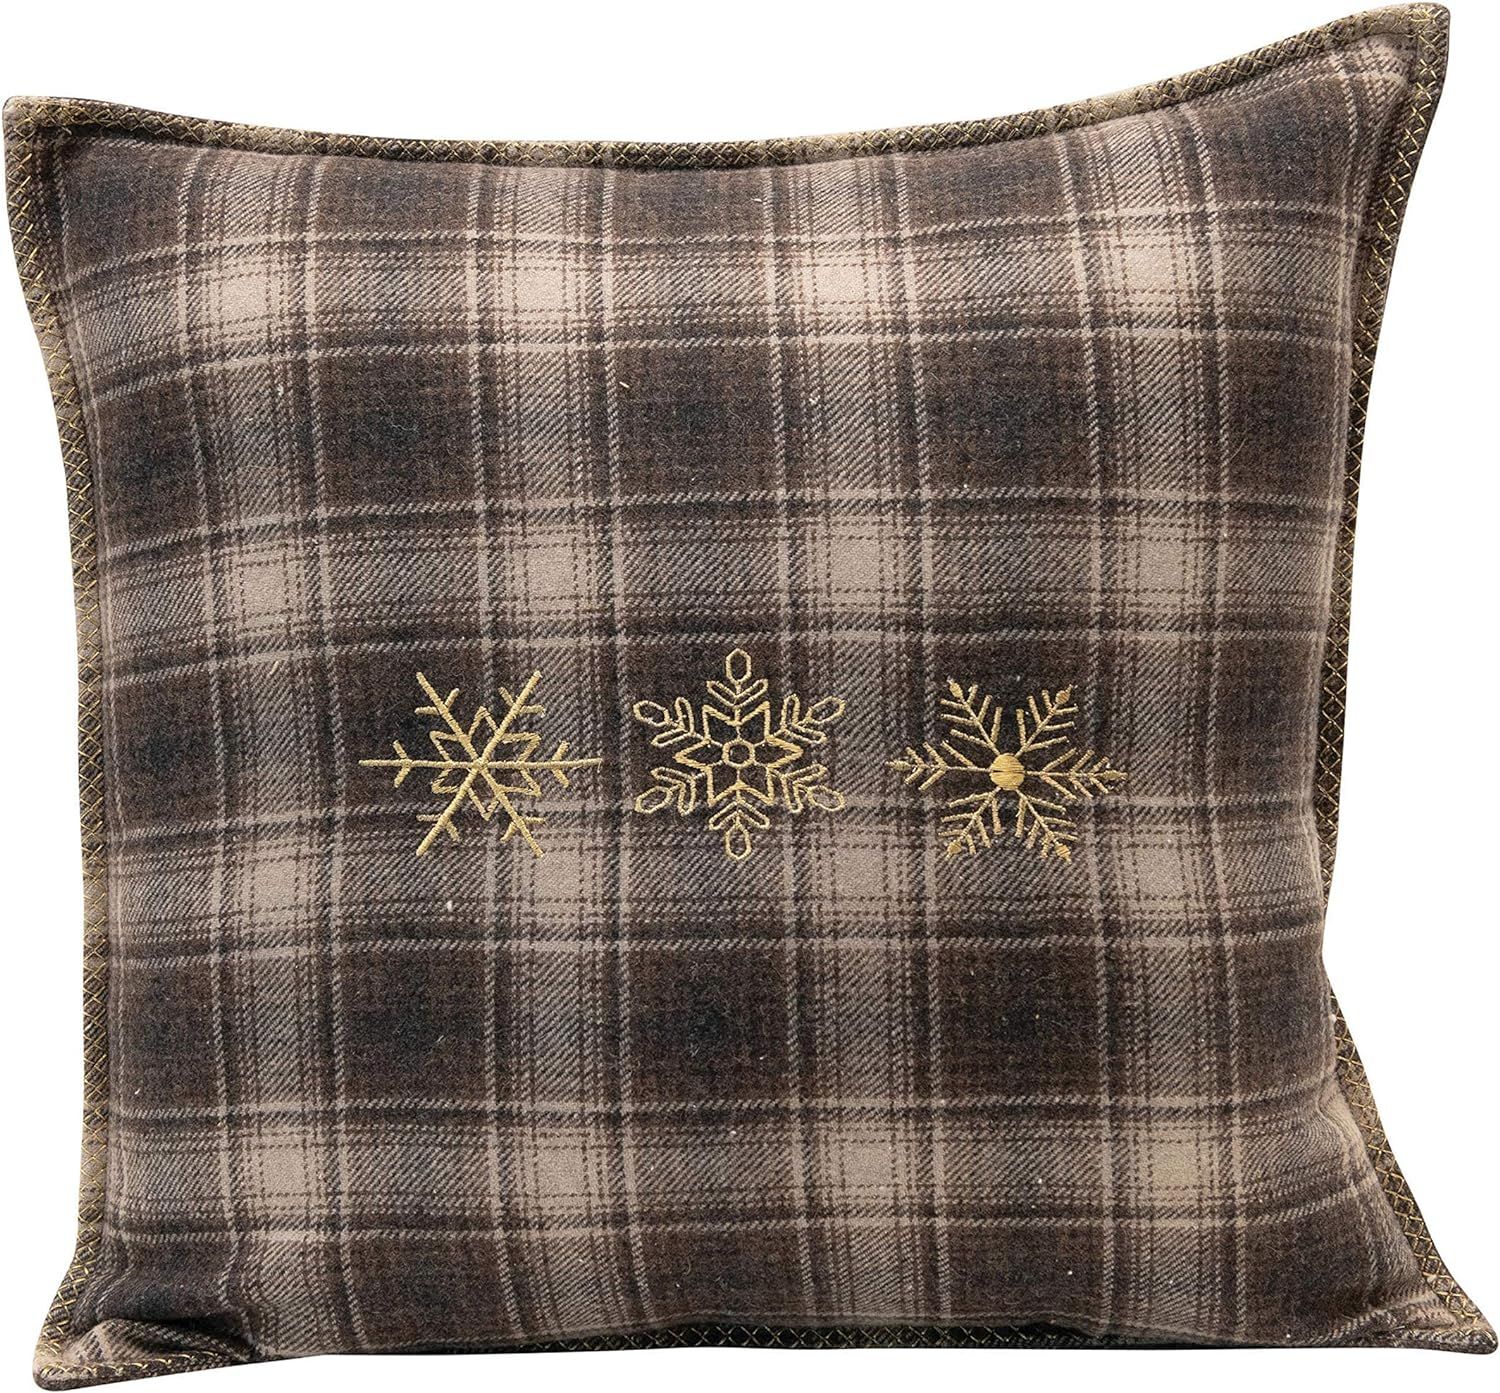 Creative Co-Op 20" Square Wool Blend Plaid w/Gold Embroidered Snowflakes, Brown & Beige Pillows, ... | Amazon (US)